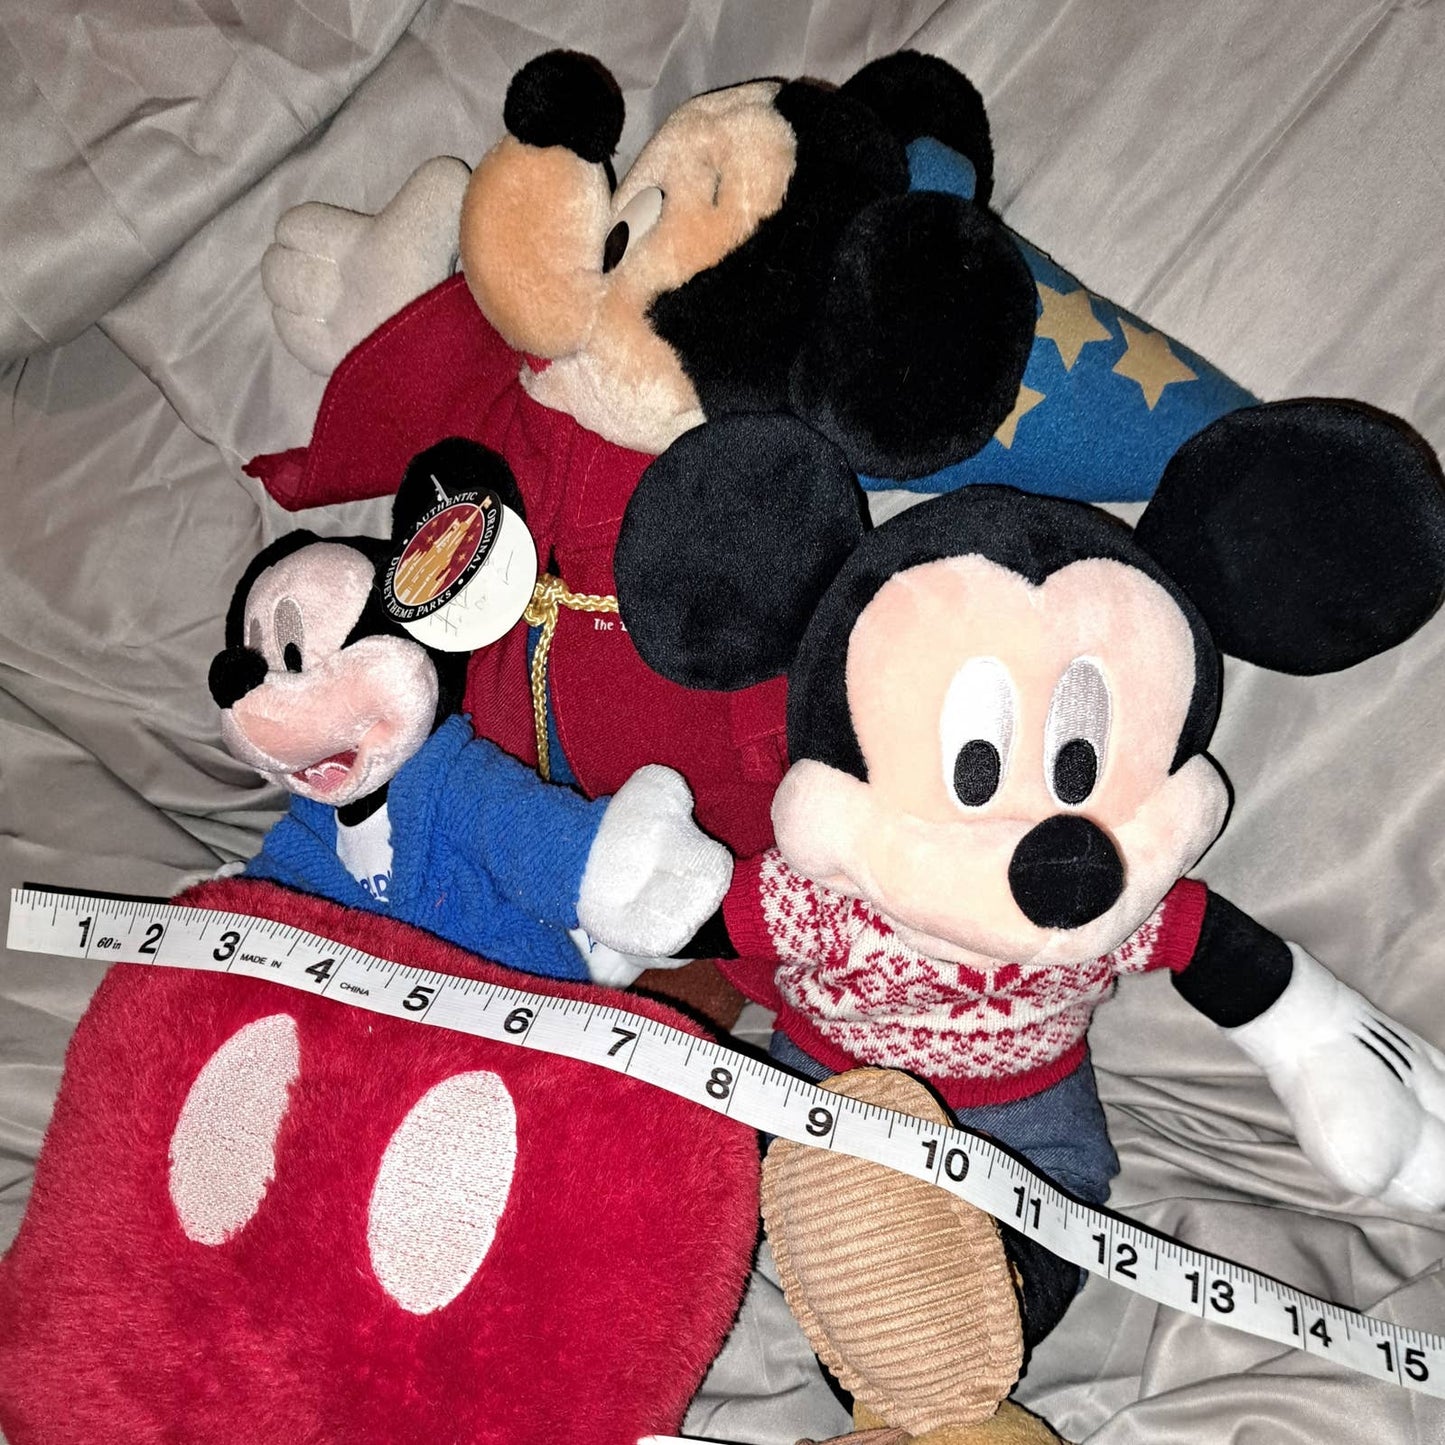 ALL YOUR MICKEY FAVEORITES! 4 Plush Mickey Mouses Dolls